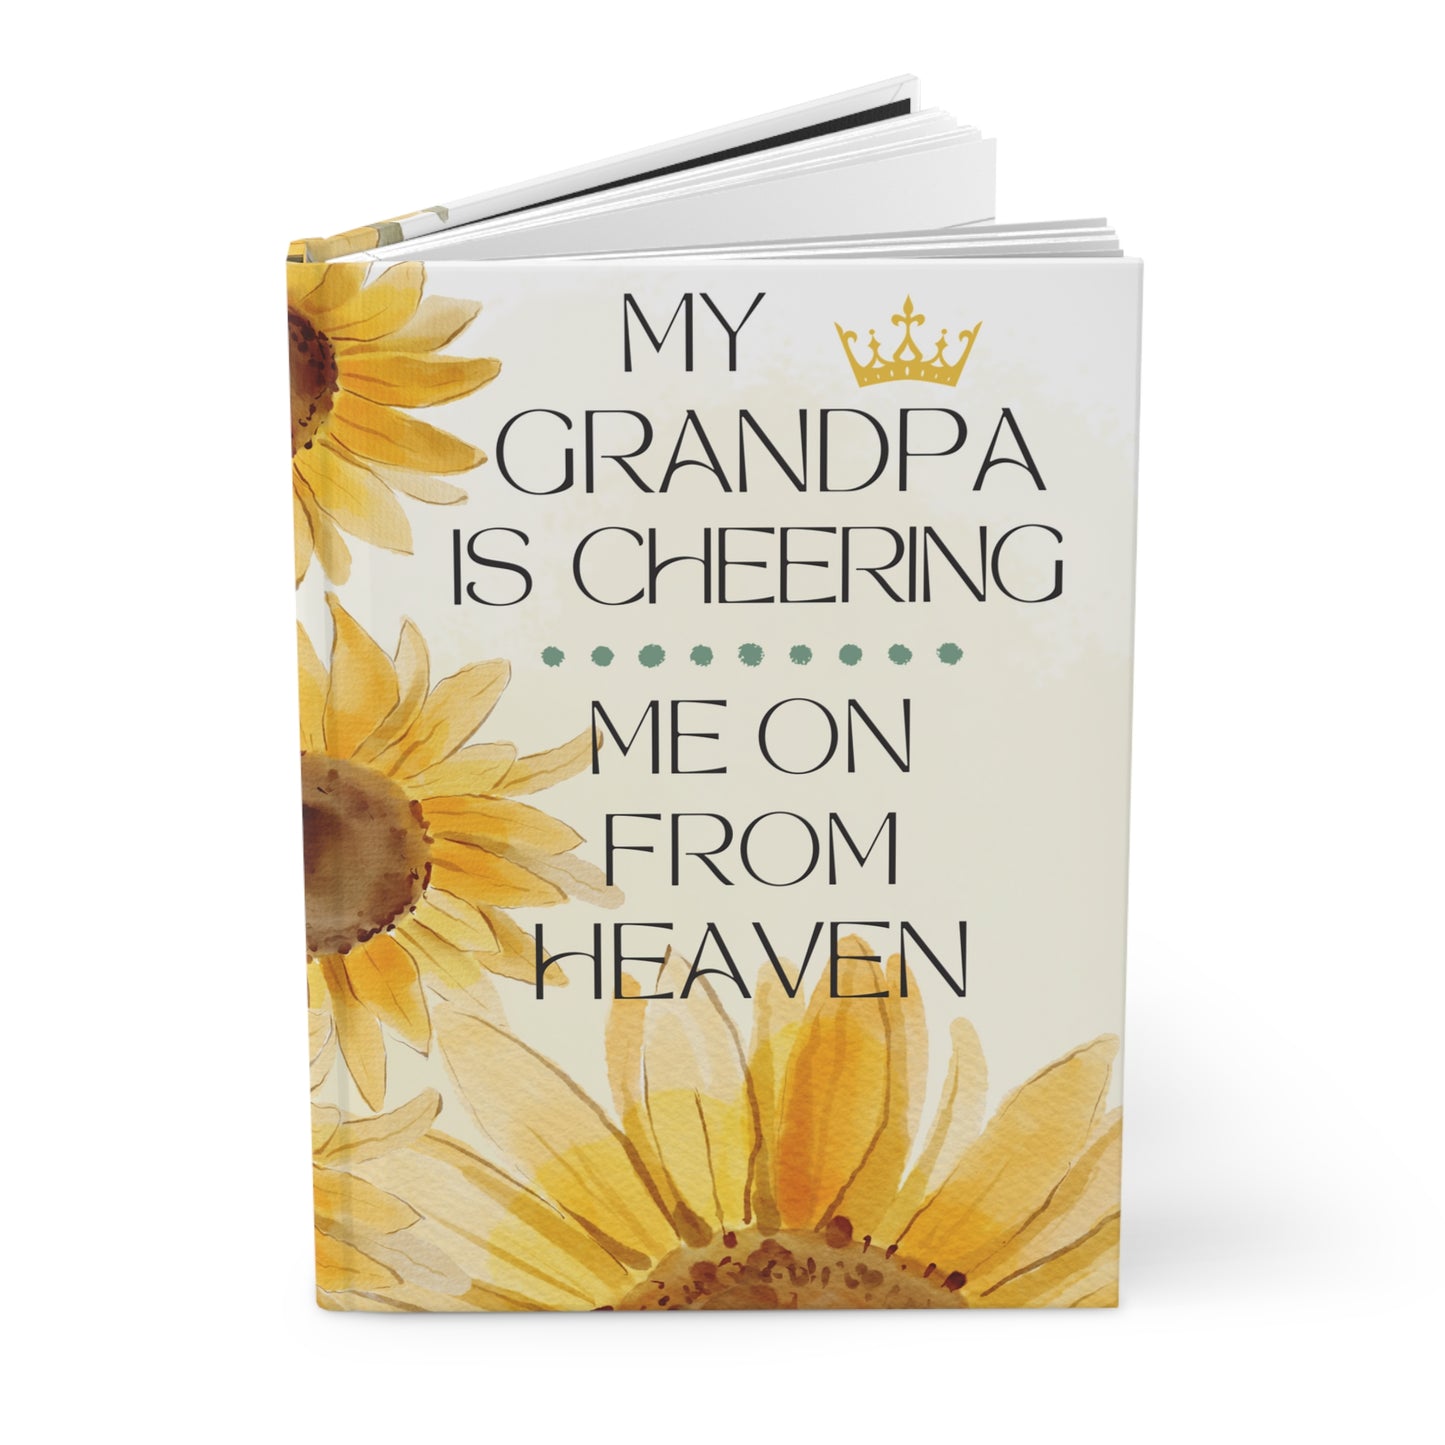 Grief Journal for Loss of Grandpa, Cheering Me On From Heaven